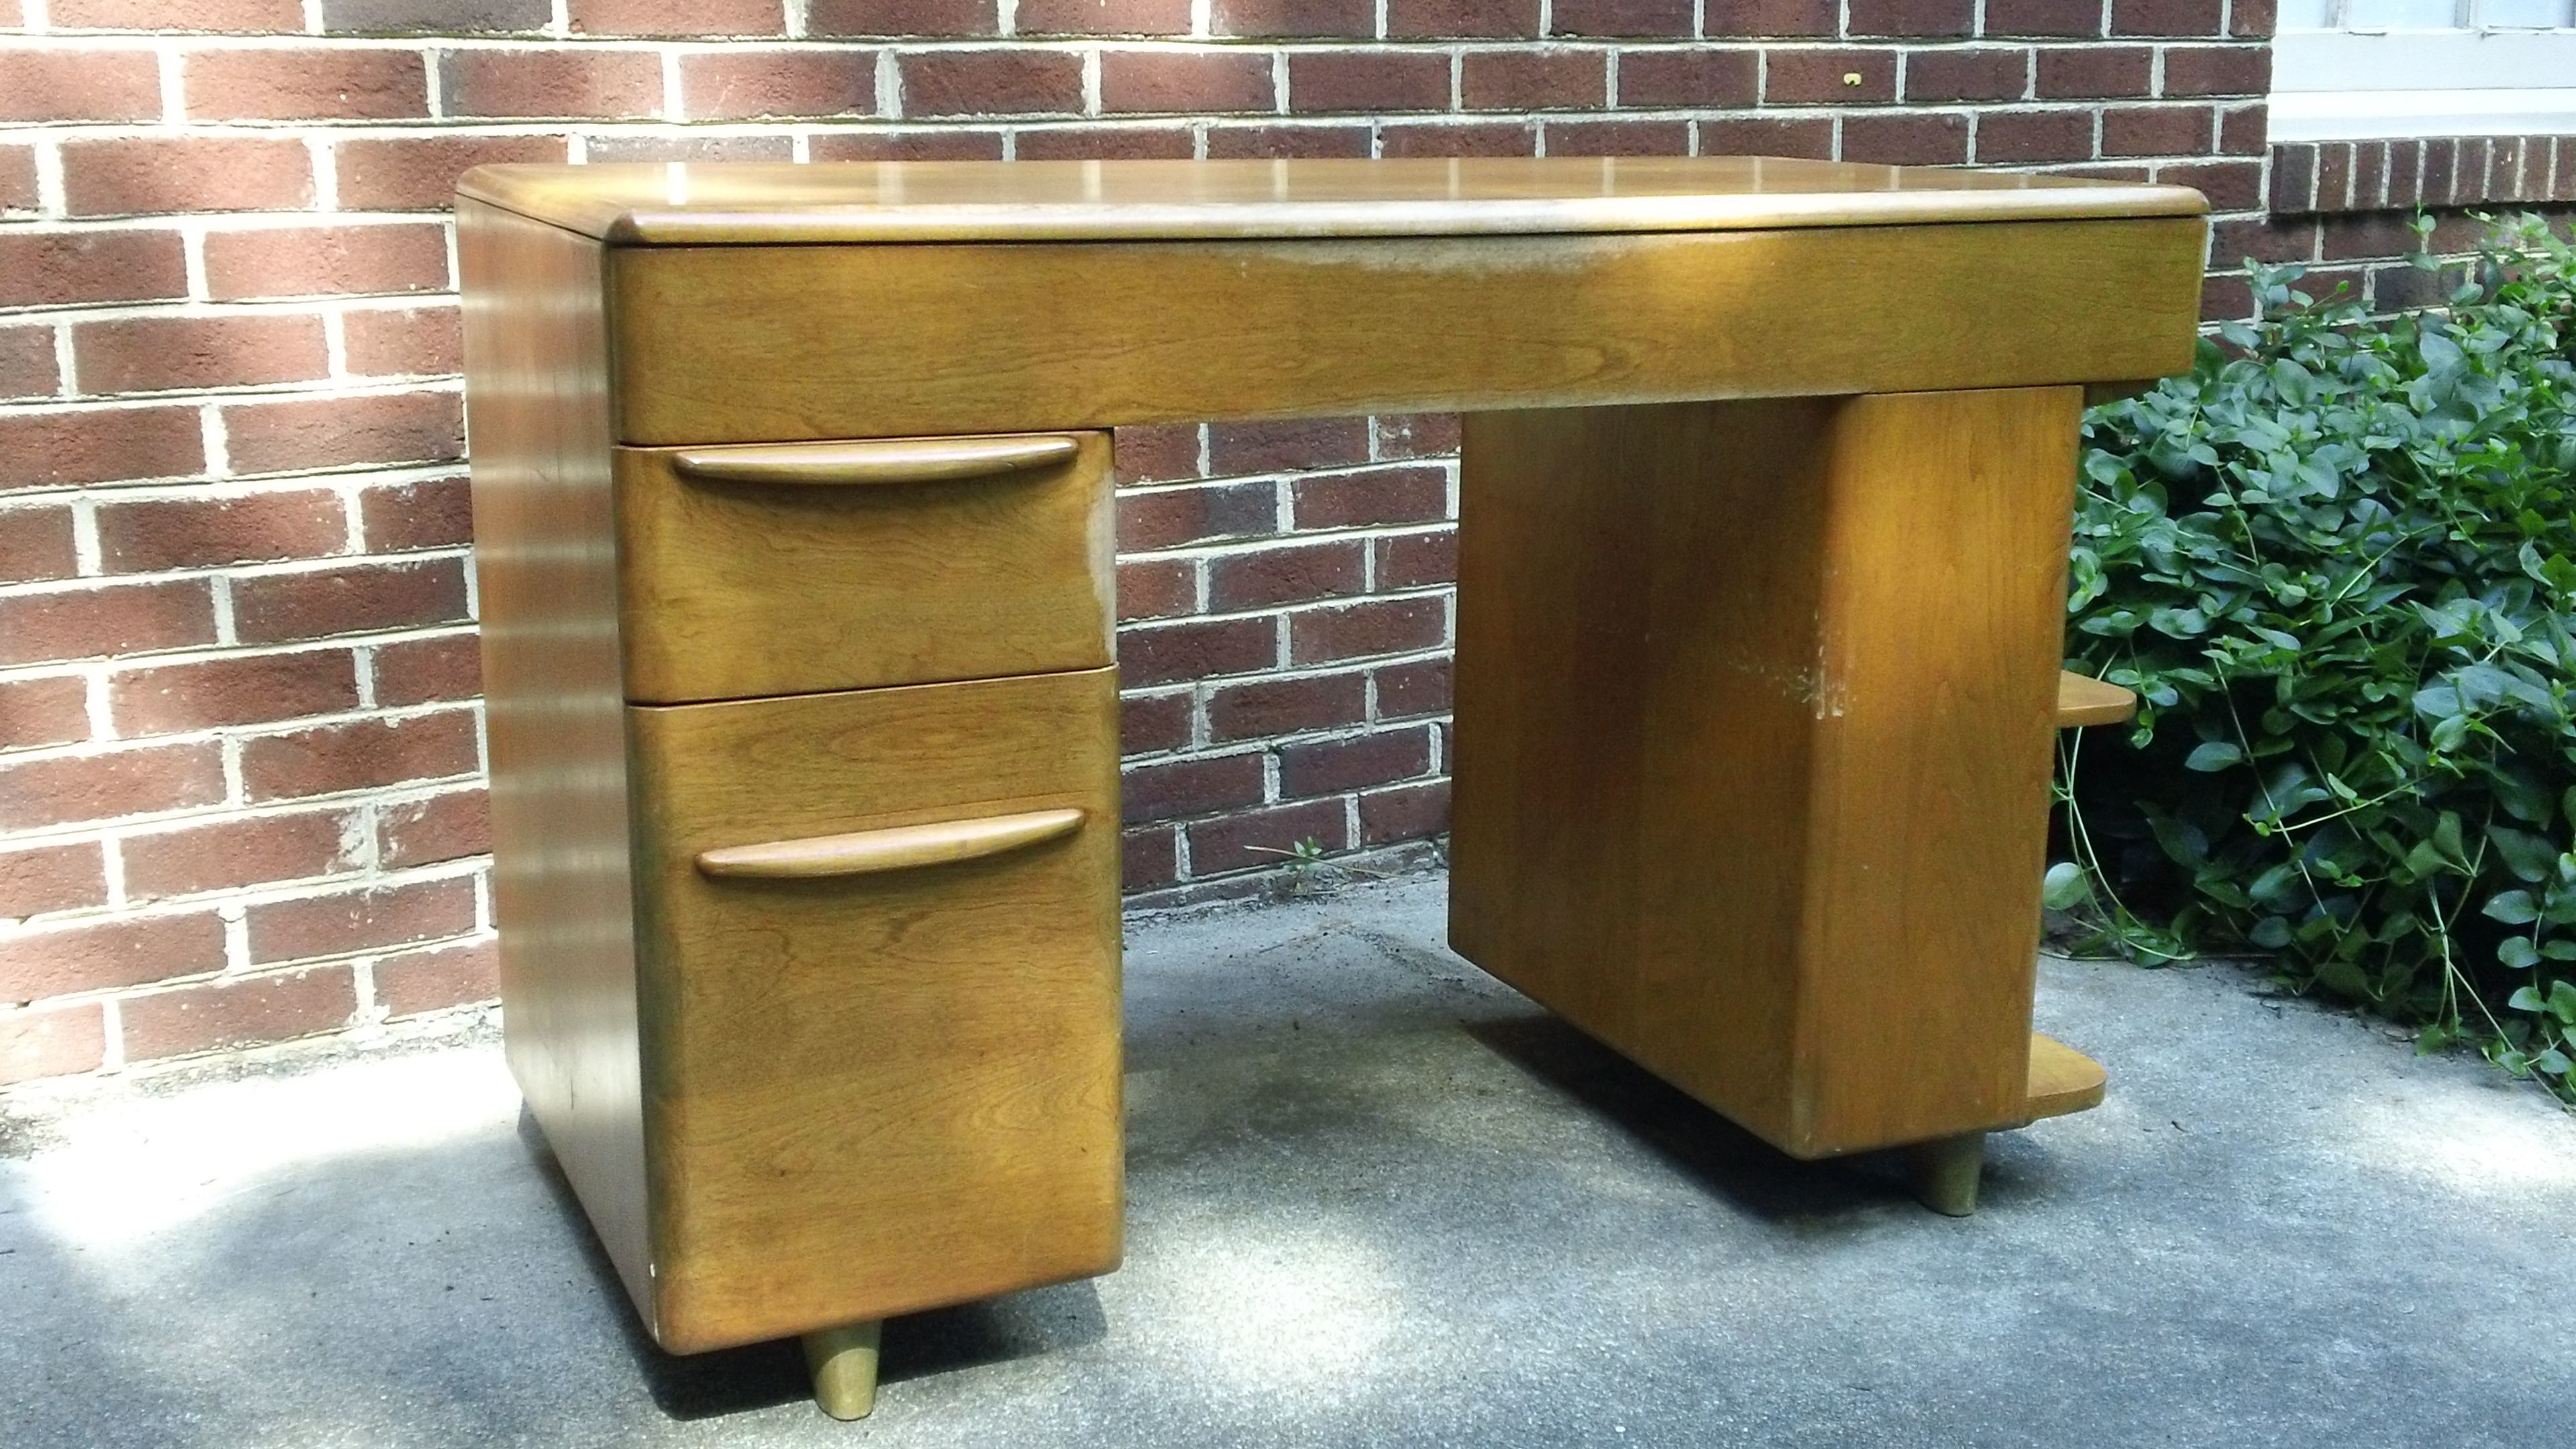 1957 Heywood Wakefield Solid Maple Desk M783w Apartment